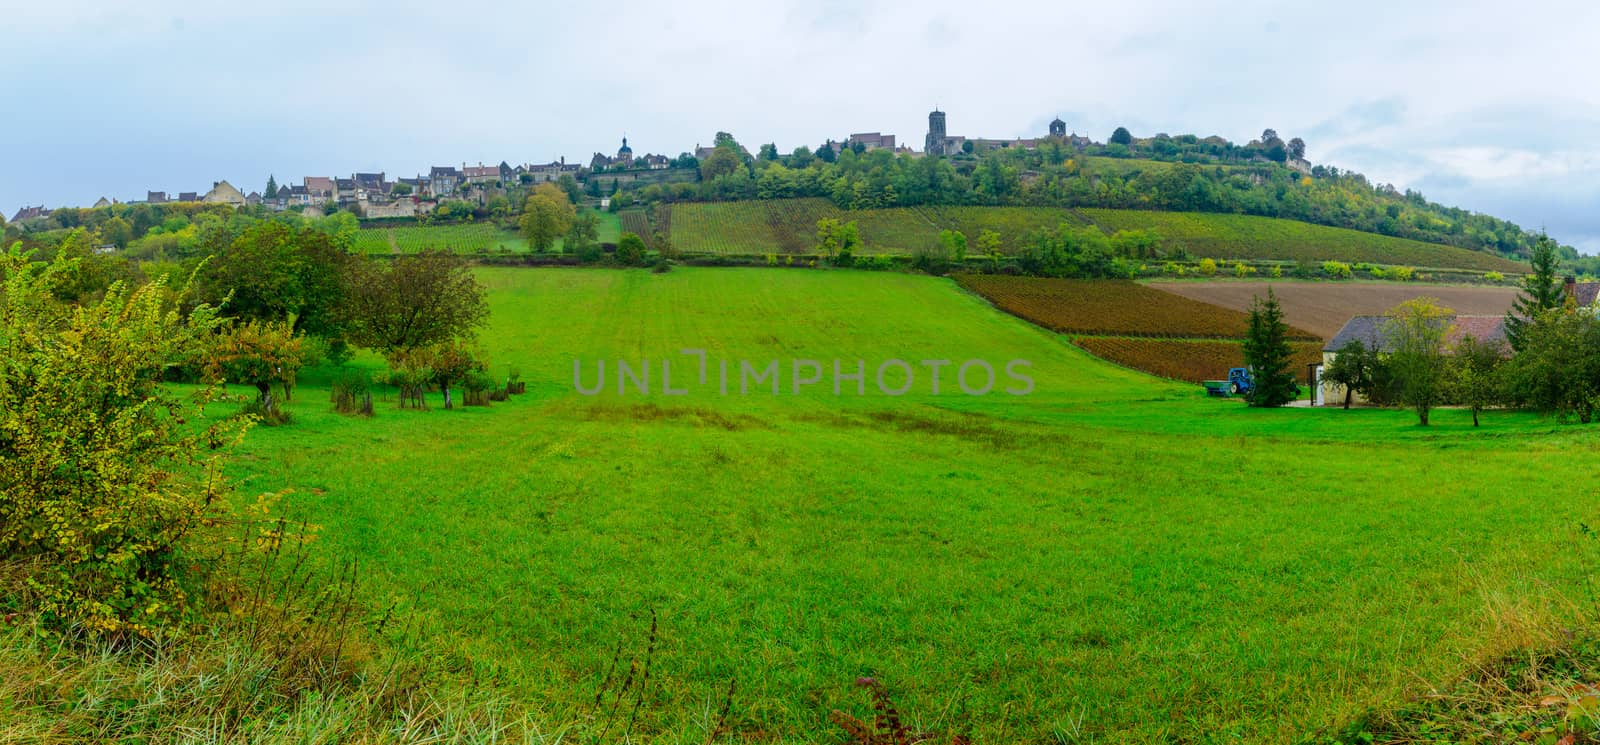 View of the Vezelay village by RnDmS